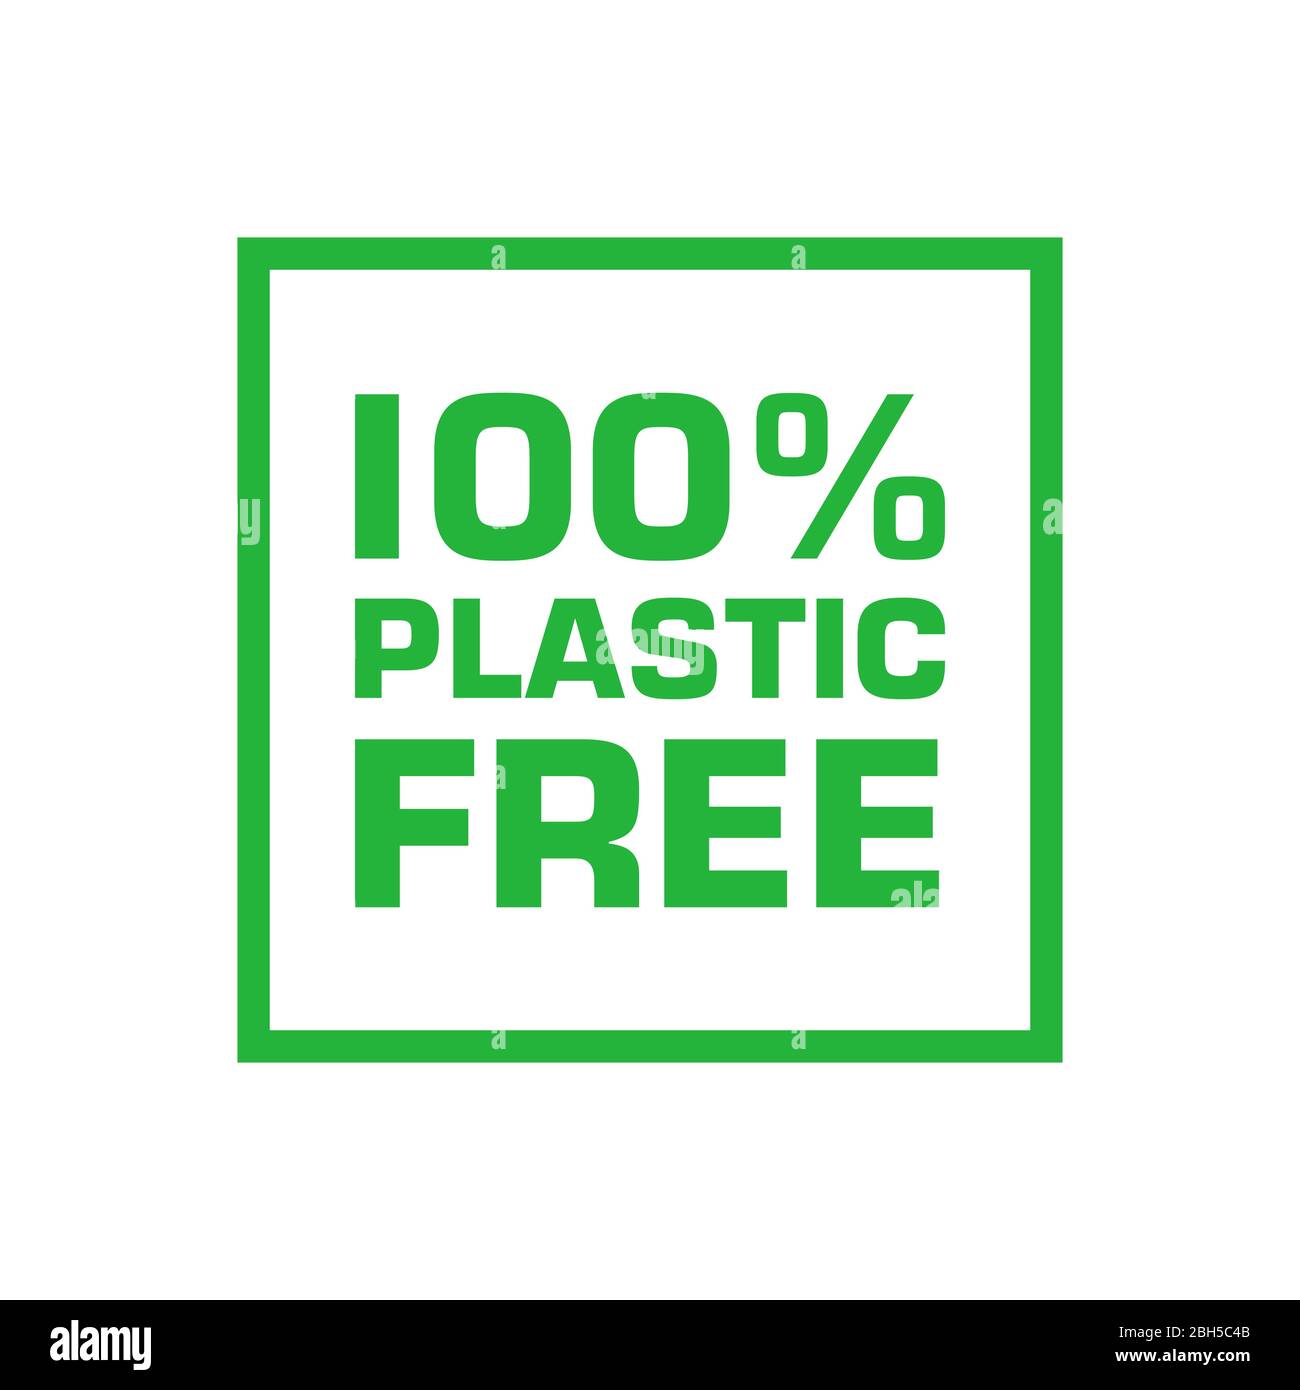 Plastic free 100 percent green title in rectangle shape. Vector illustration. Stock Vector